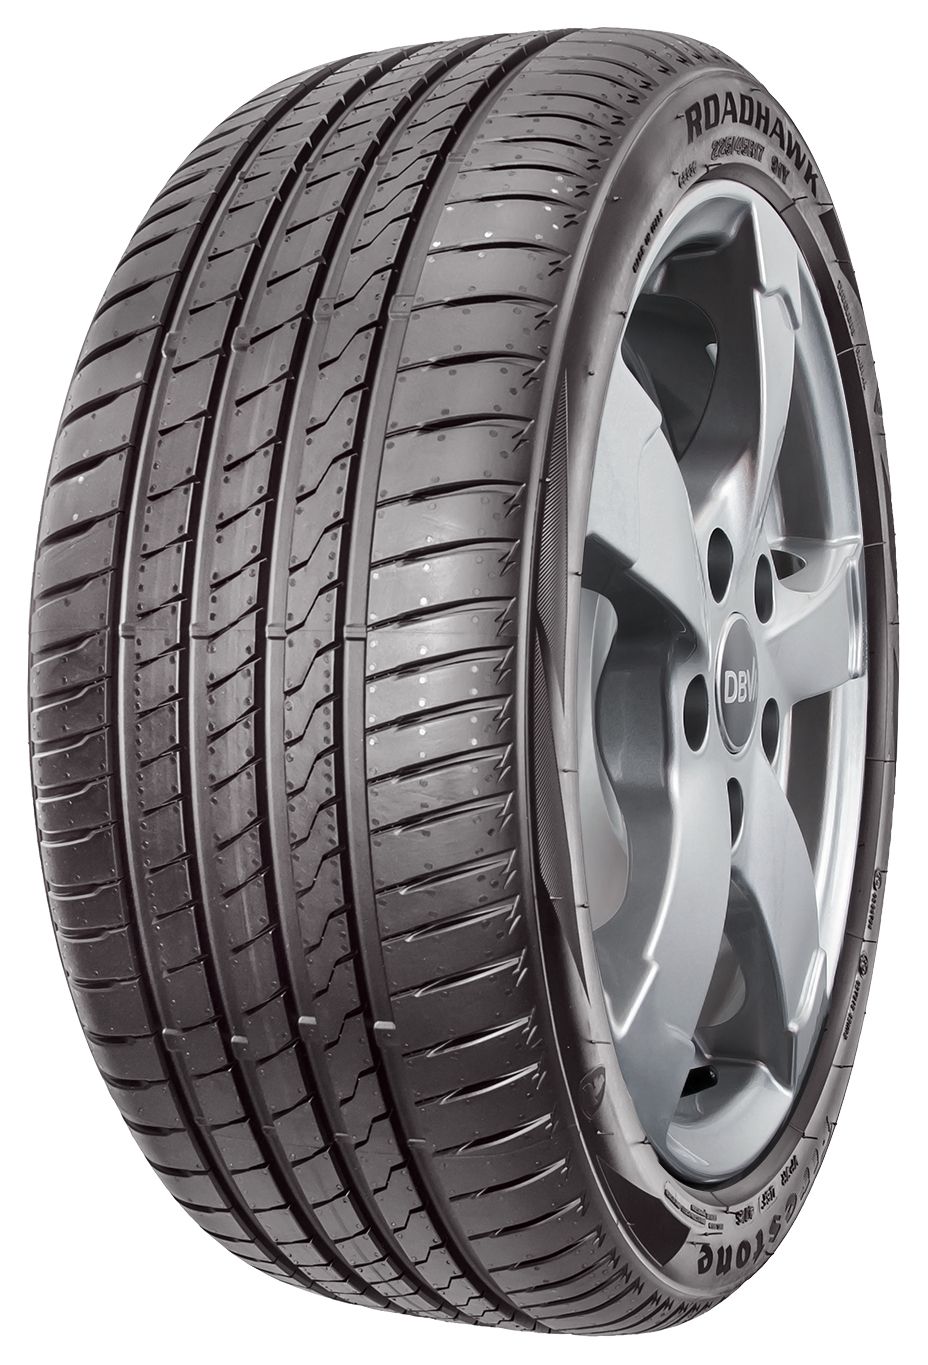 Firestone RoadHawk - Tyre Reviews and Tests